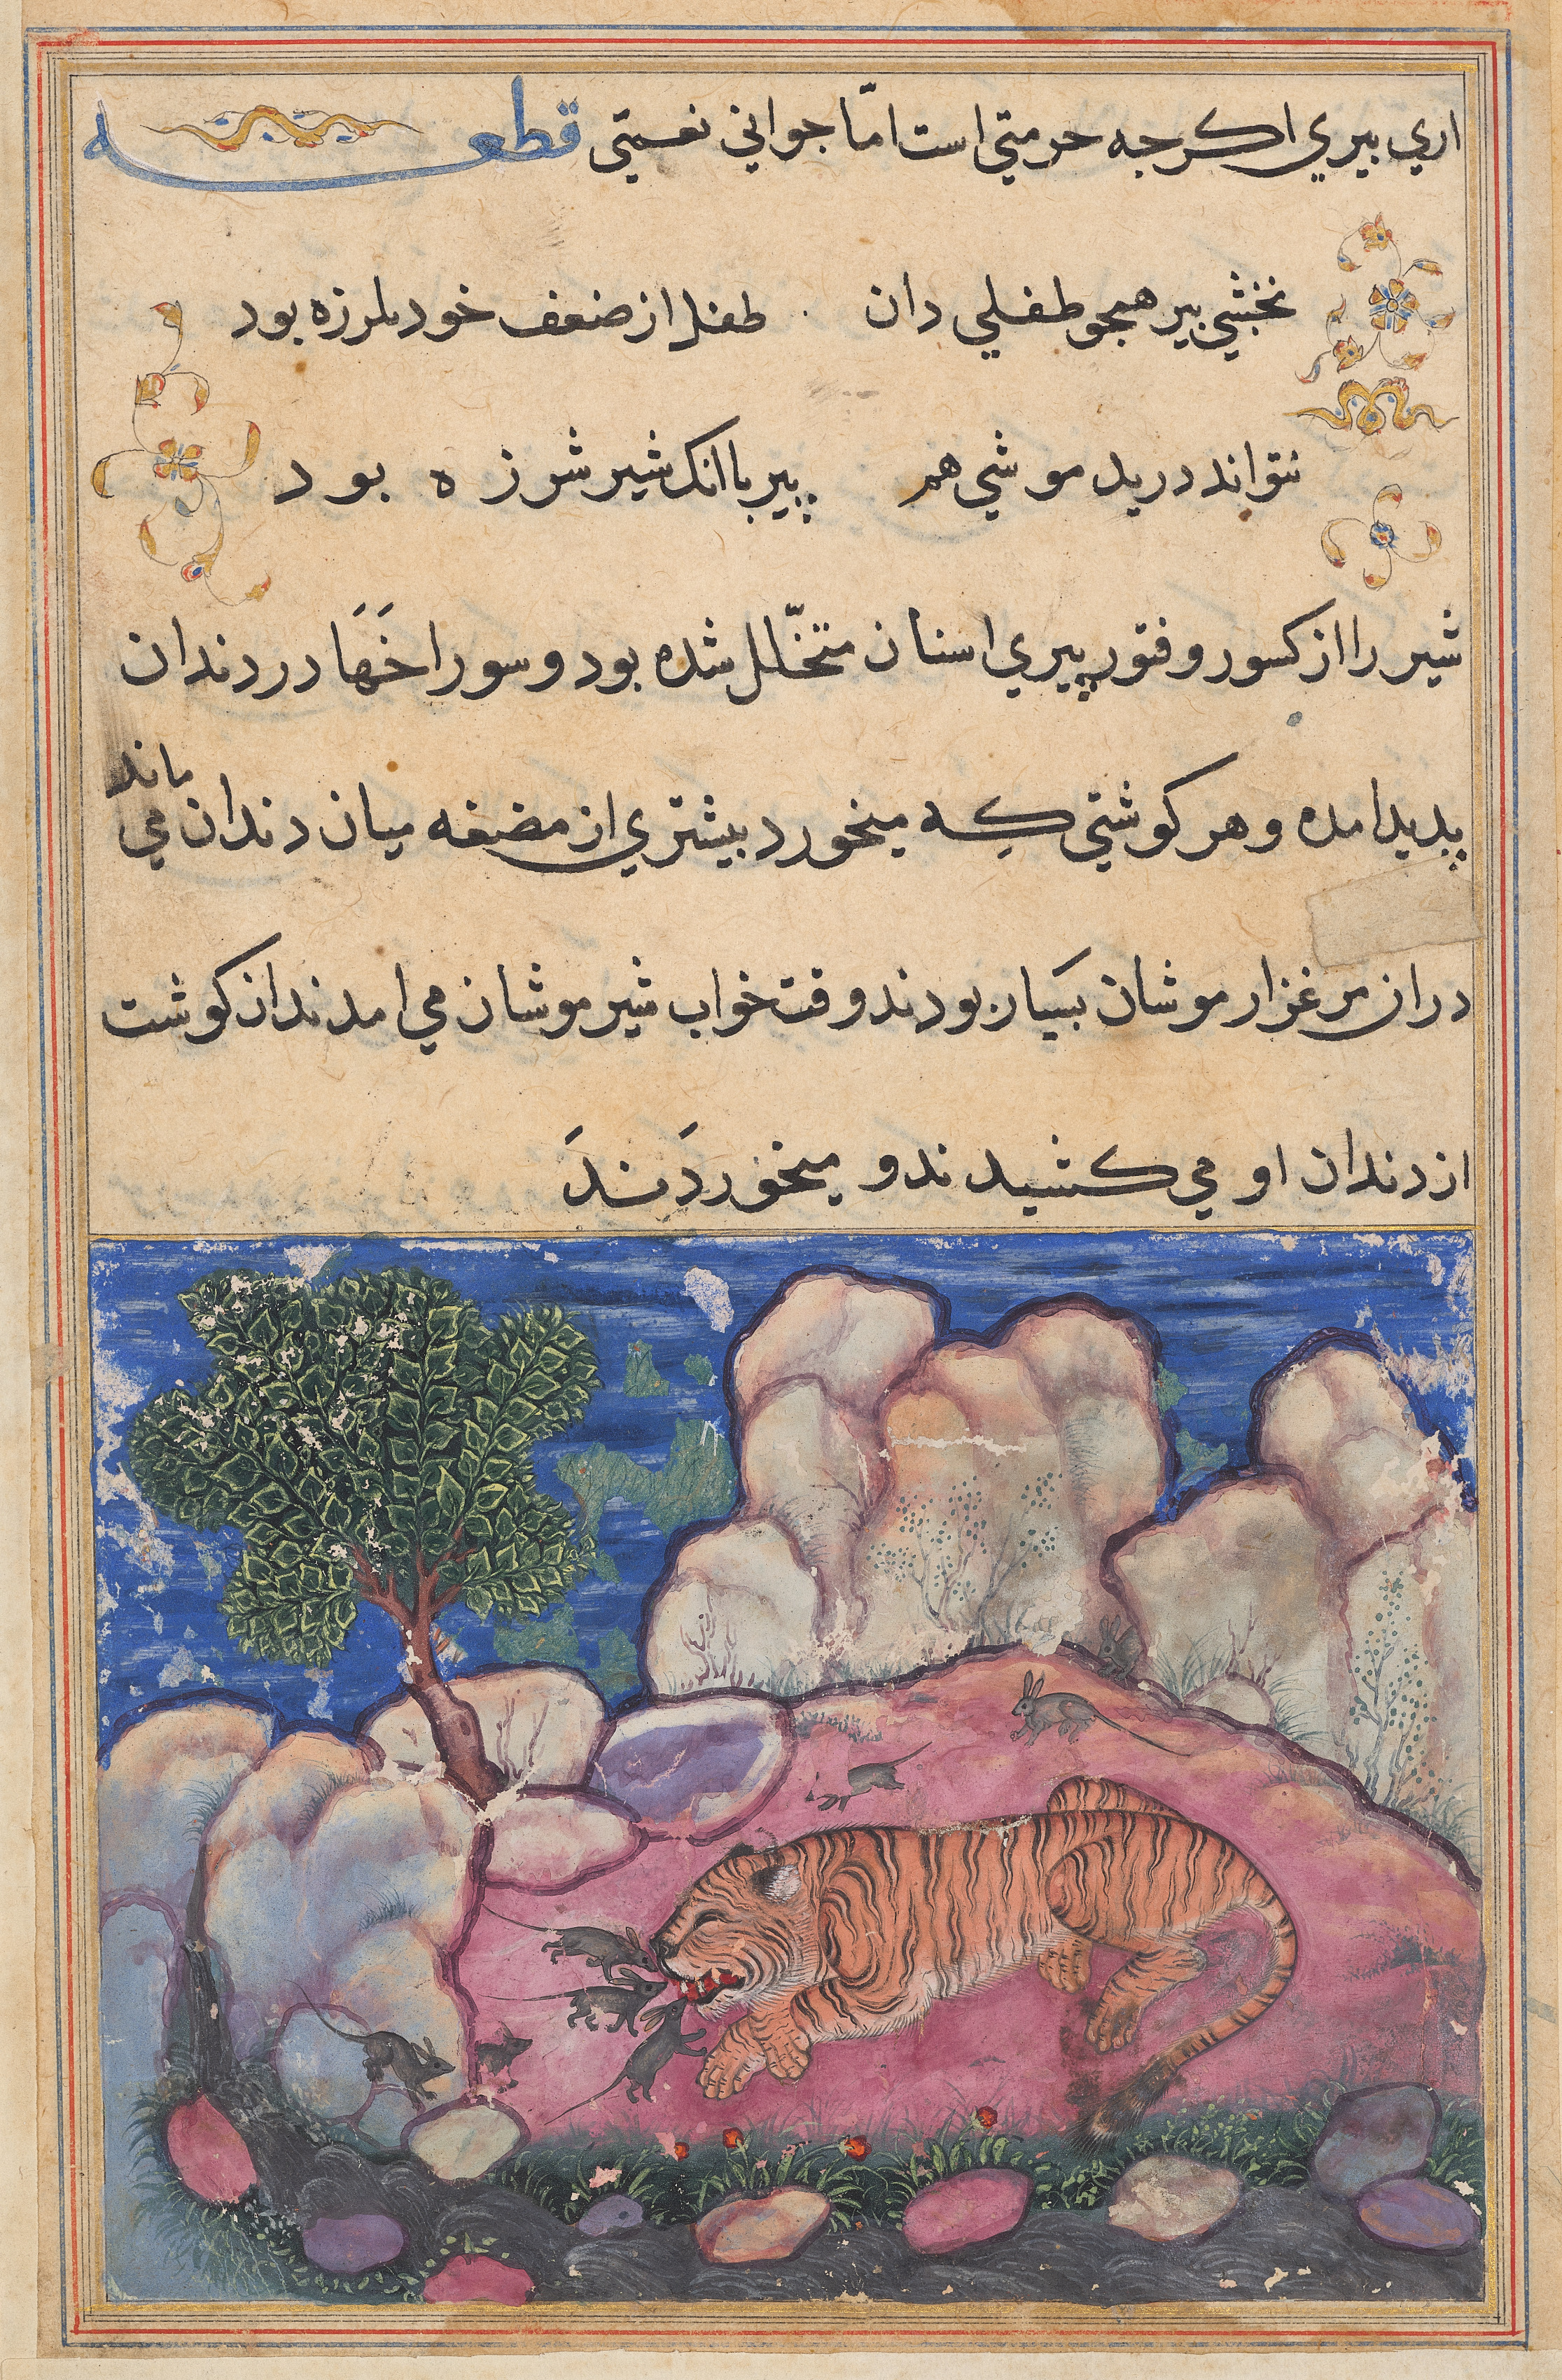 The lion disturbed by mice who eat the food trapped in his aging teeth, from a Tuti-nama (Tales of a Parrot): Fifteenth Night